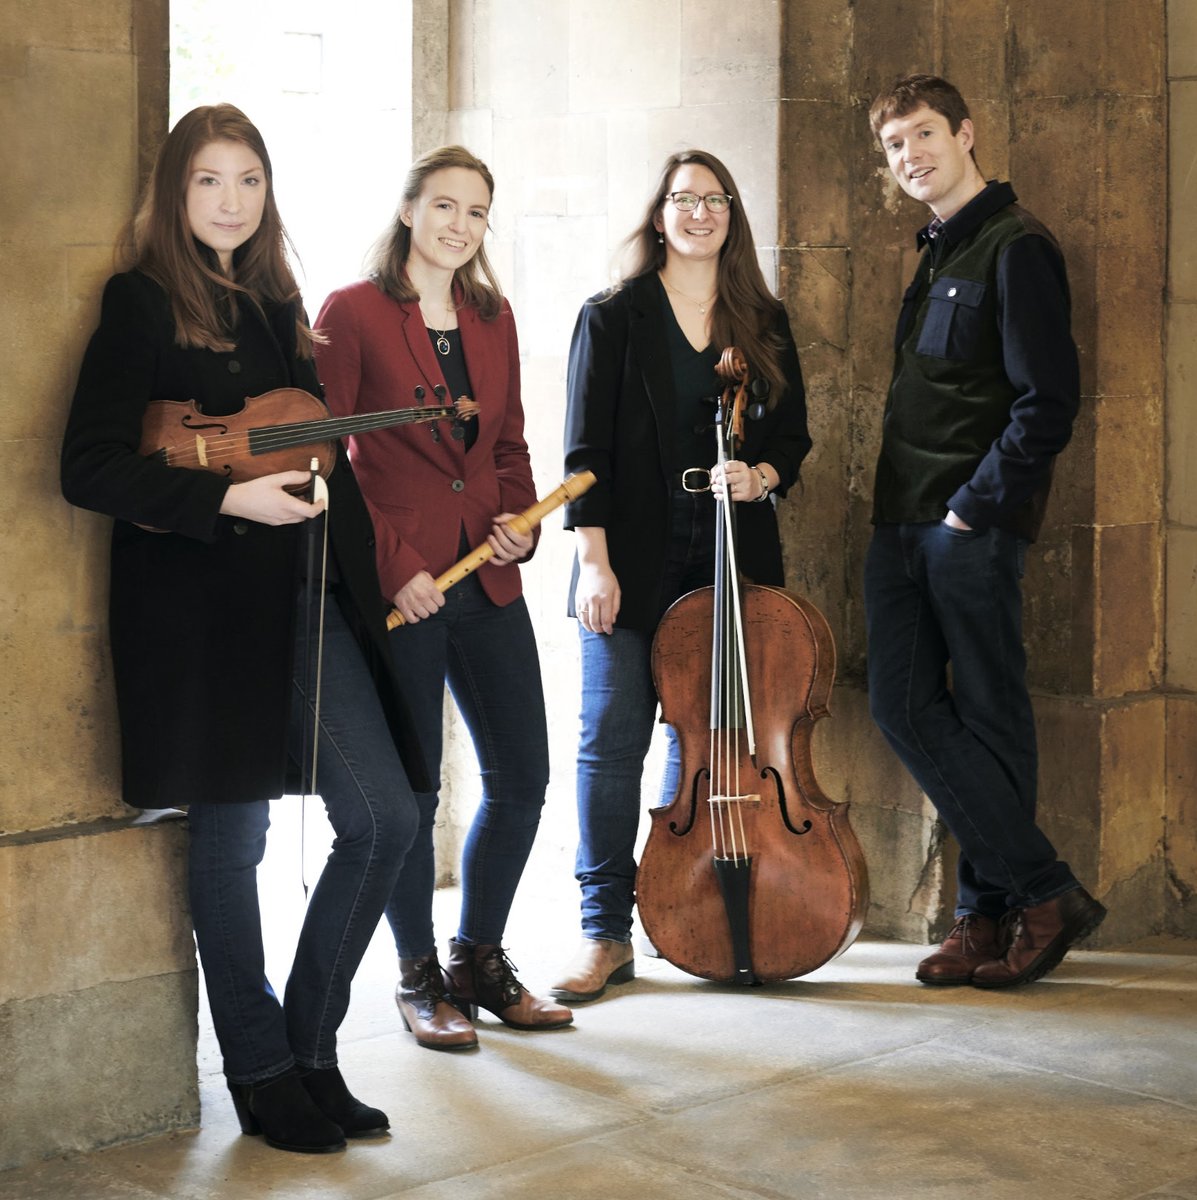 TICKETS ARE NOW ON SALE from @TicketSource to hear @EnsembleHesperi bring the music of early 18th century London to life with the warmth and clarity of period instruments. Friday the 15th of March at St Alkmund’s Church For more information see link in our bio